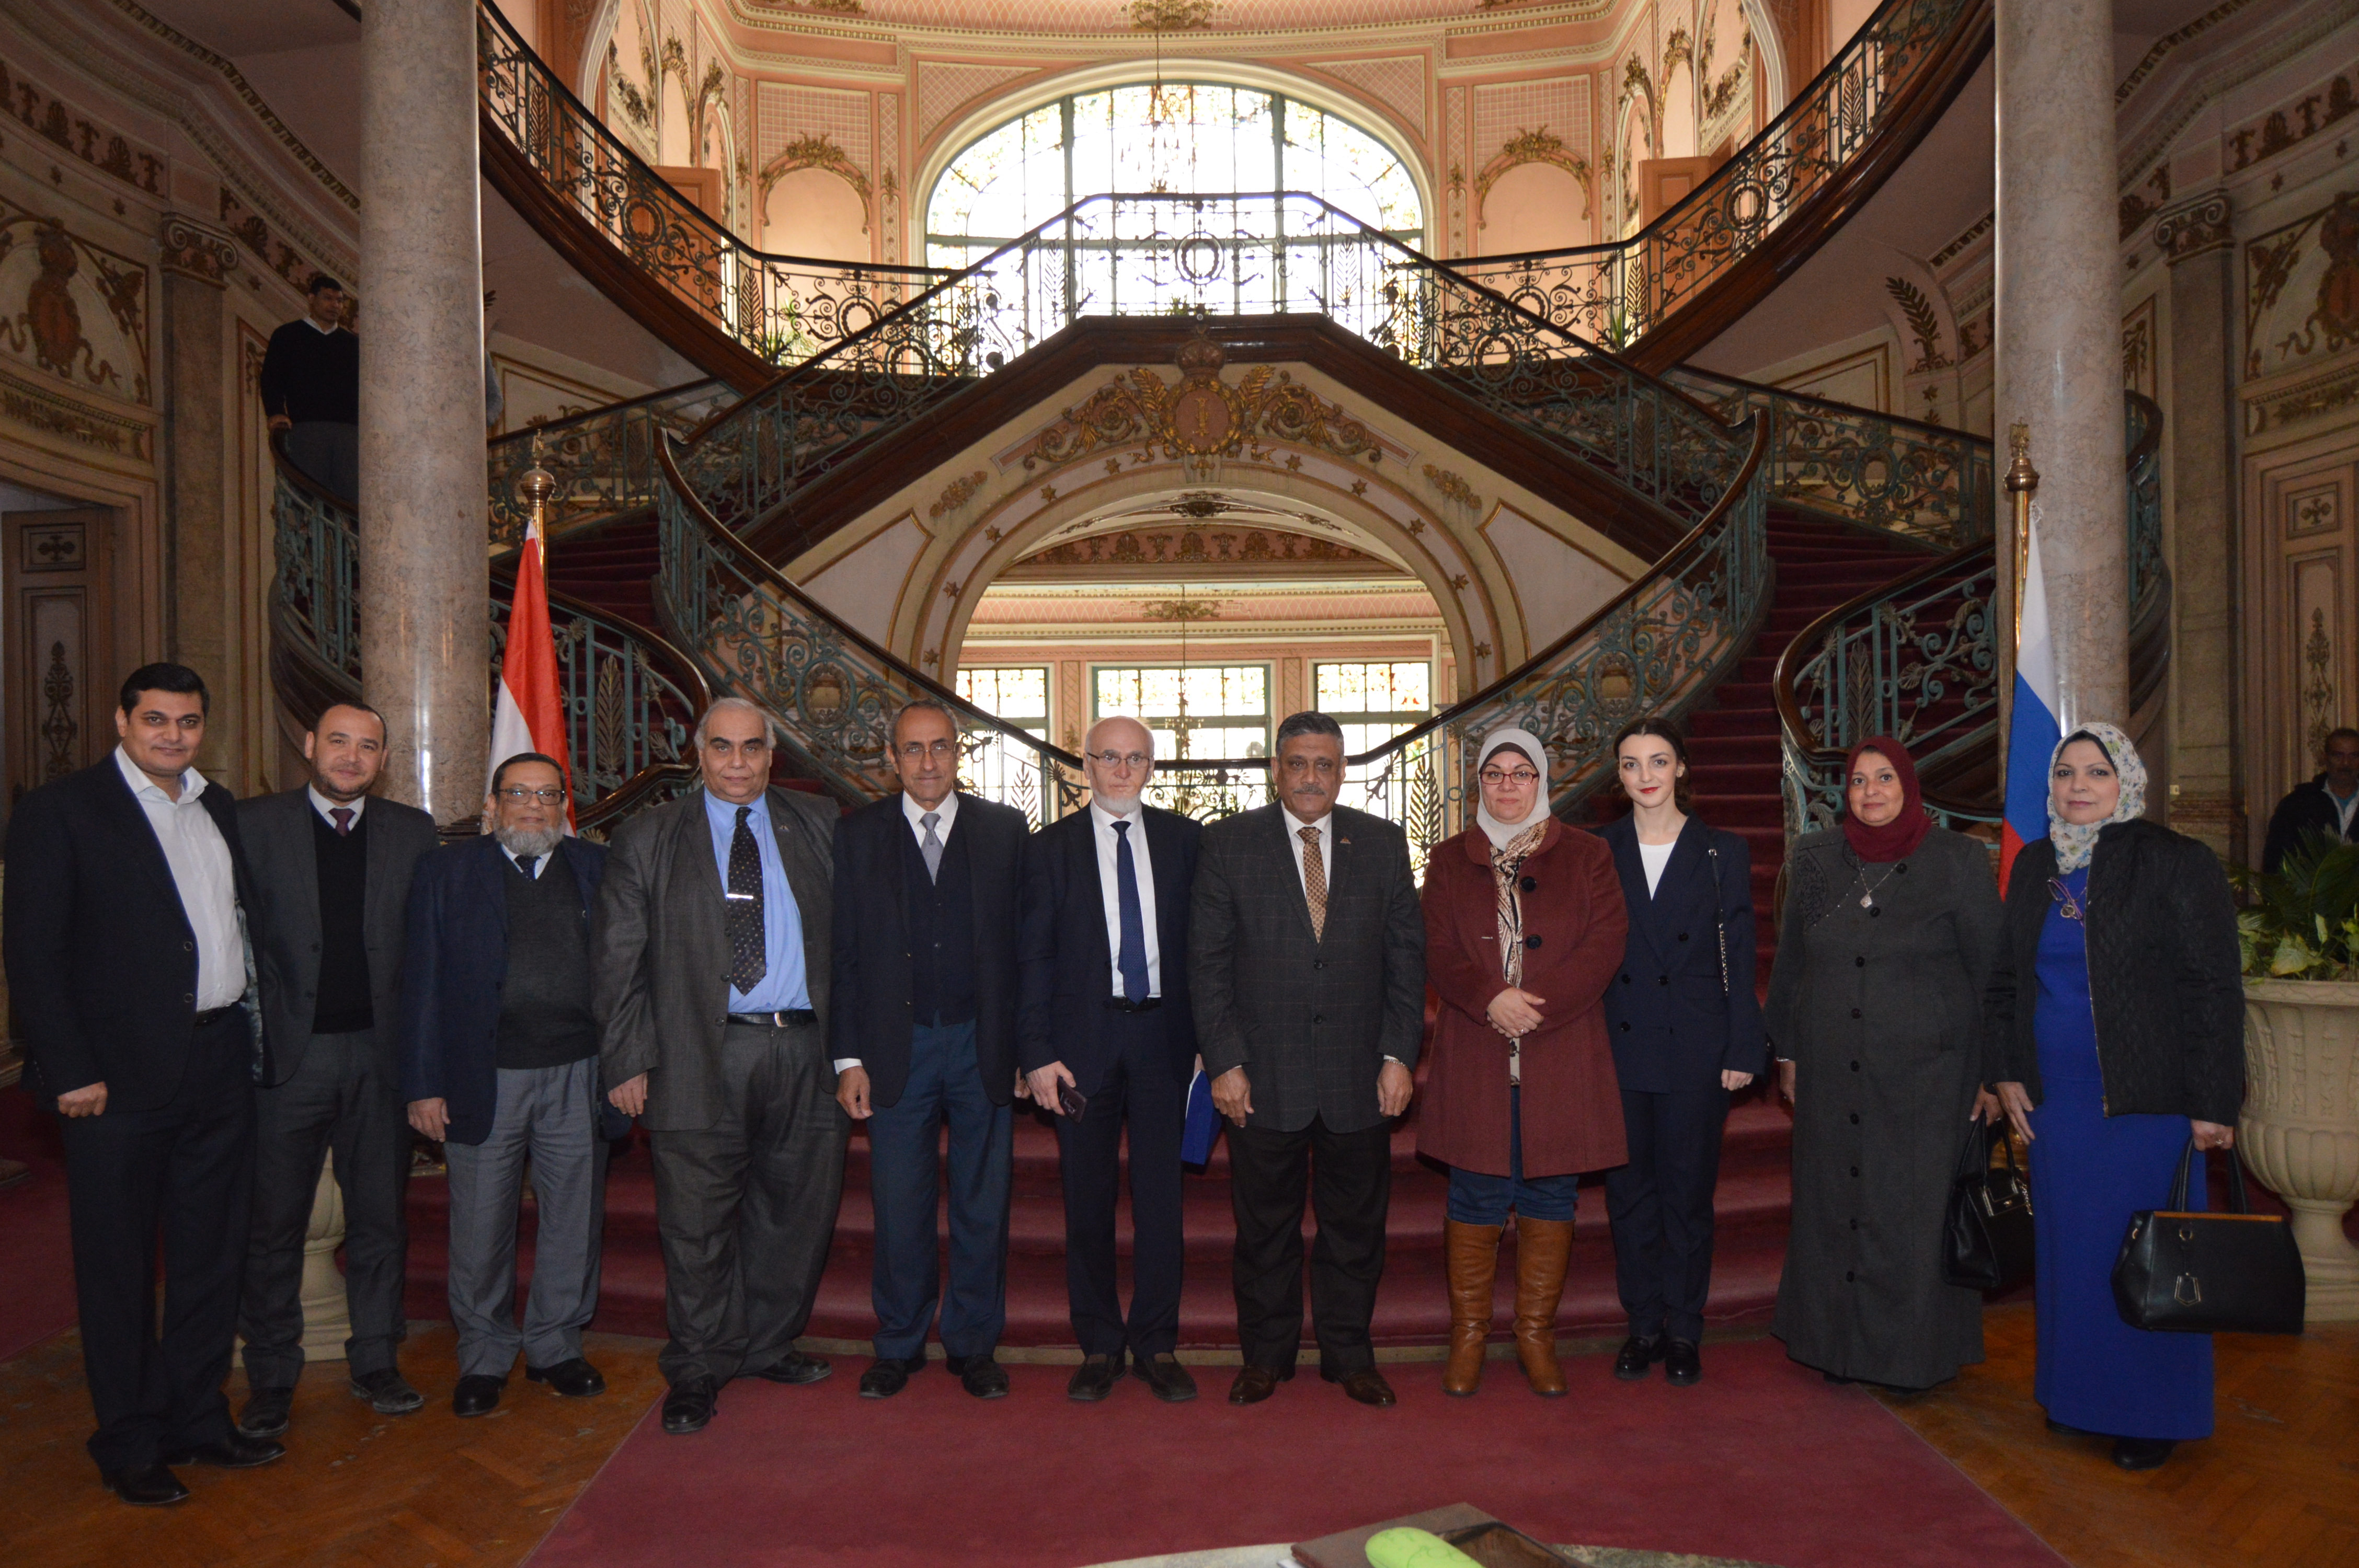 A cooperation protocol between Ain Shams University and Moscow State Academy